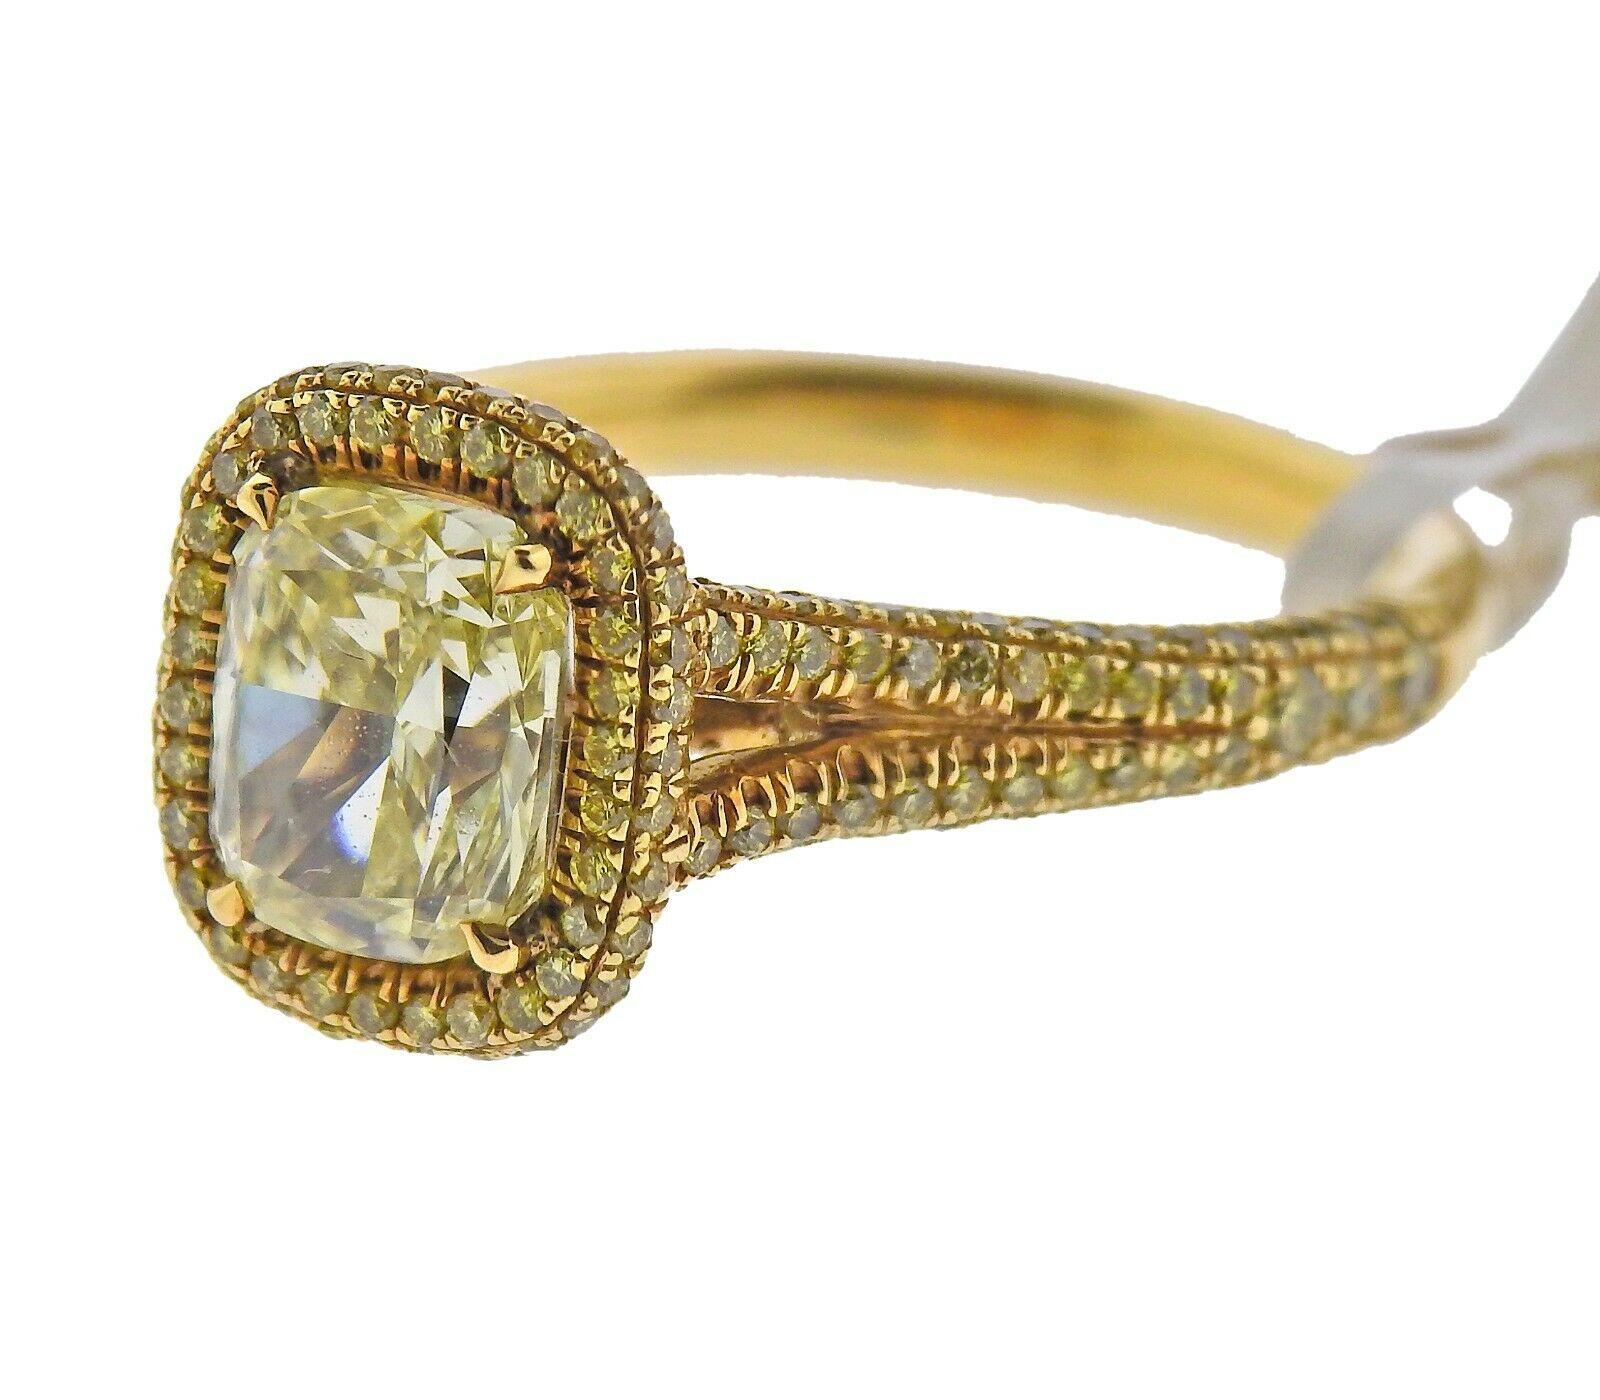 18k yellow gold ring by JB star. Set with a natural VS/ Fancy Yellow 1.72ct center diamond, adorned with 226 round VS/ fancy yellow diamonds totaling 0.74ctw. Ring size - 5.5, ring top - 11mm x 9.5mm. Marked - 18kp. Weight - 5.4 grams. Retail